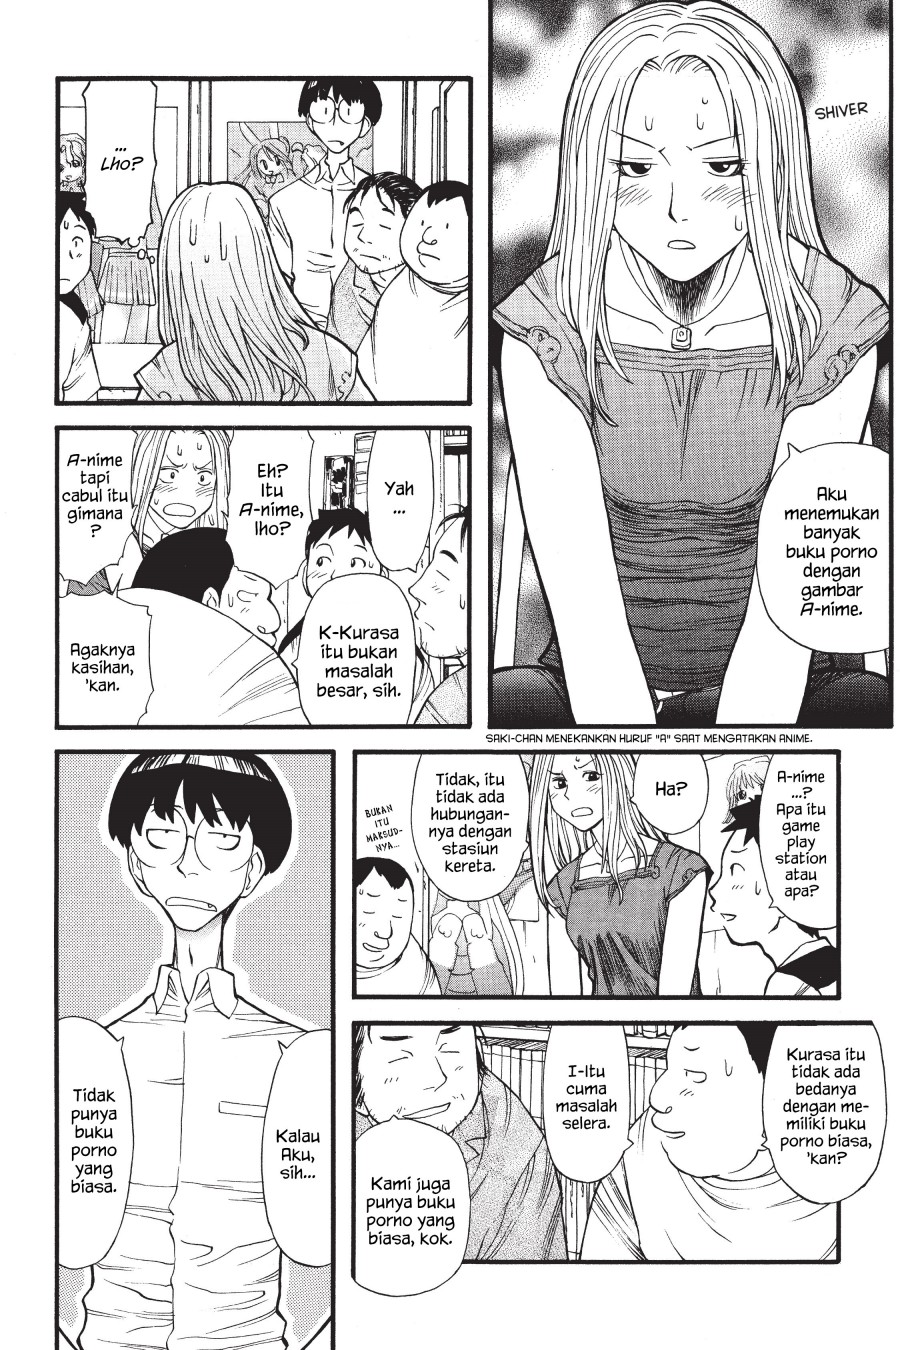 Genshiken – The Society for the Study of Modern Visual Culture Chapter 04 Image 9